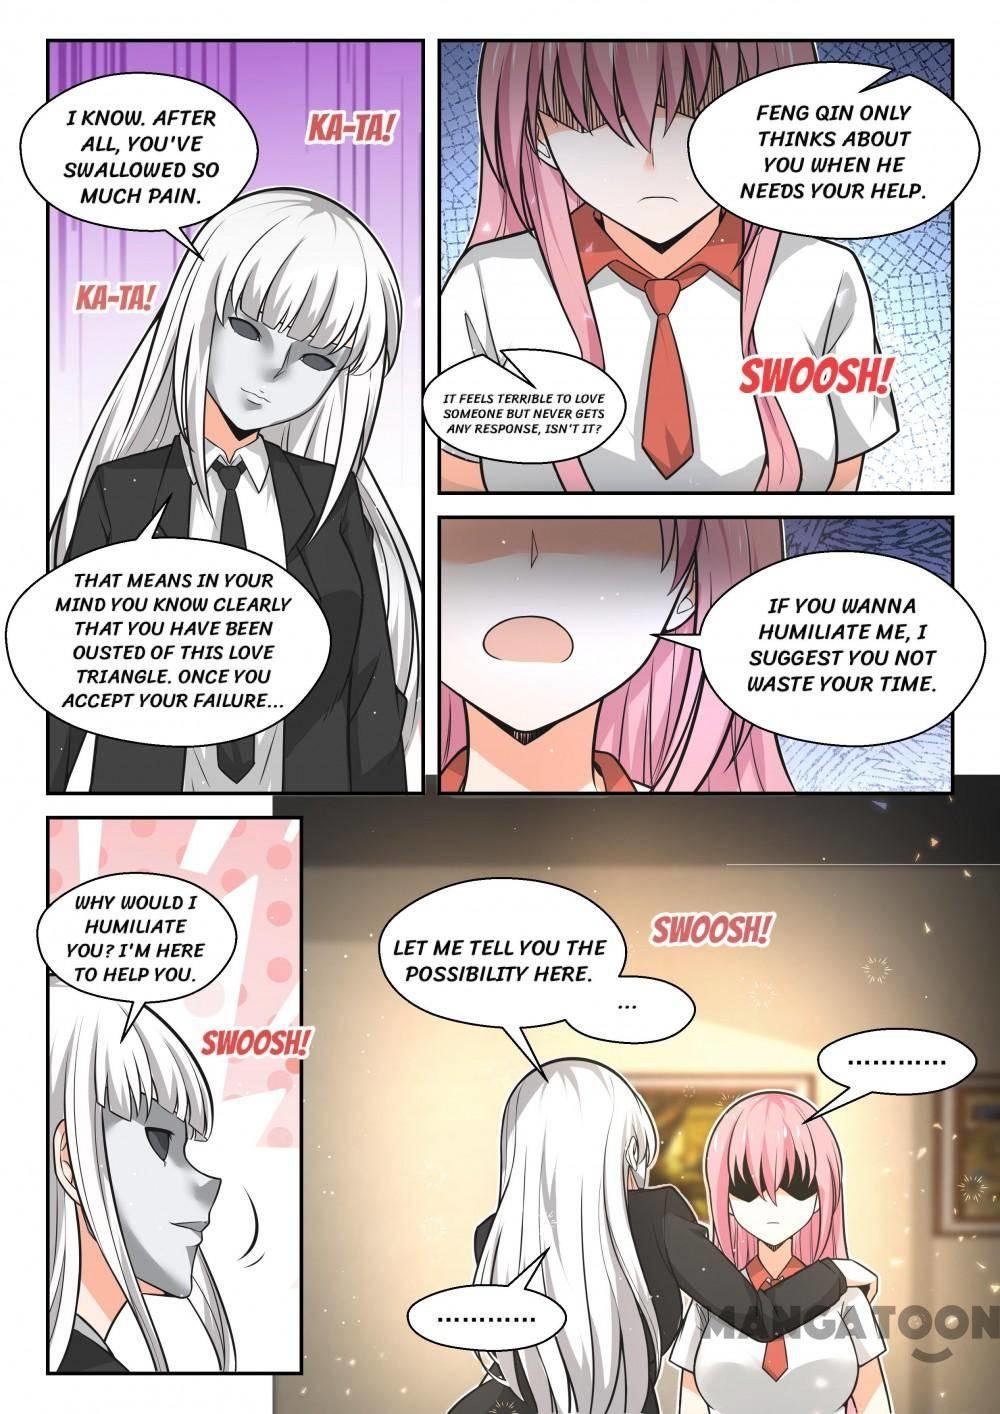 The Boy In The All-Girls School Chapter 472 page 5 - Mangakakalot